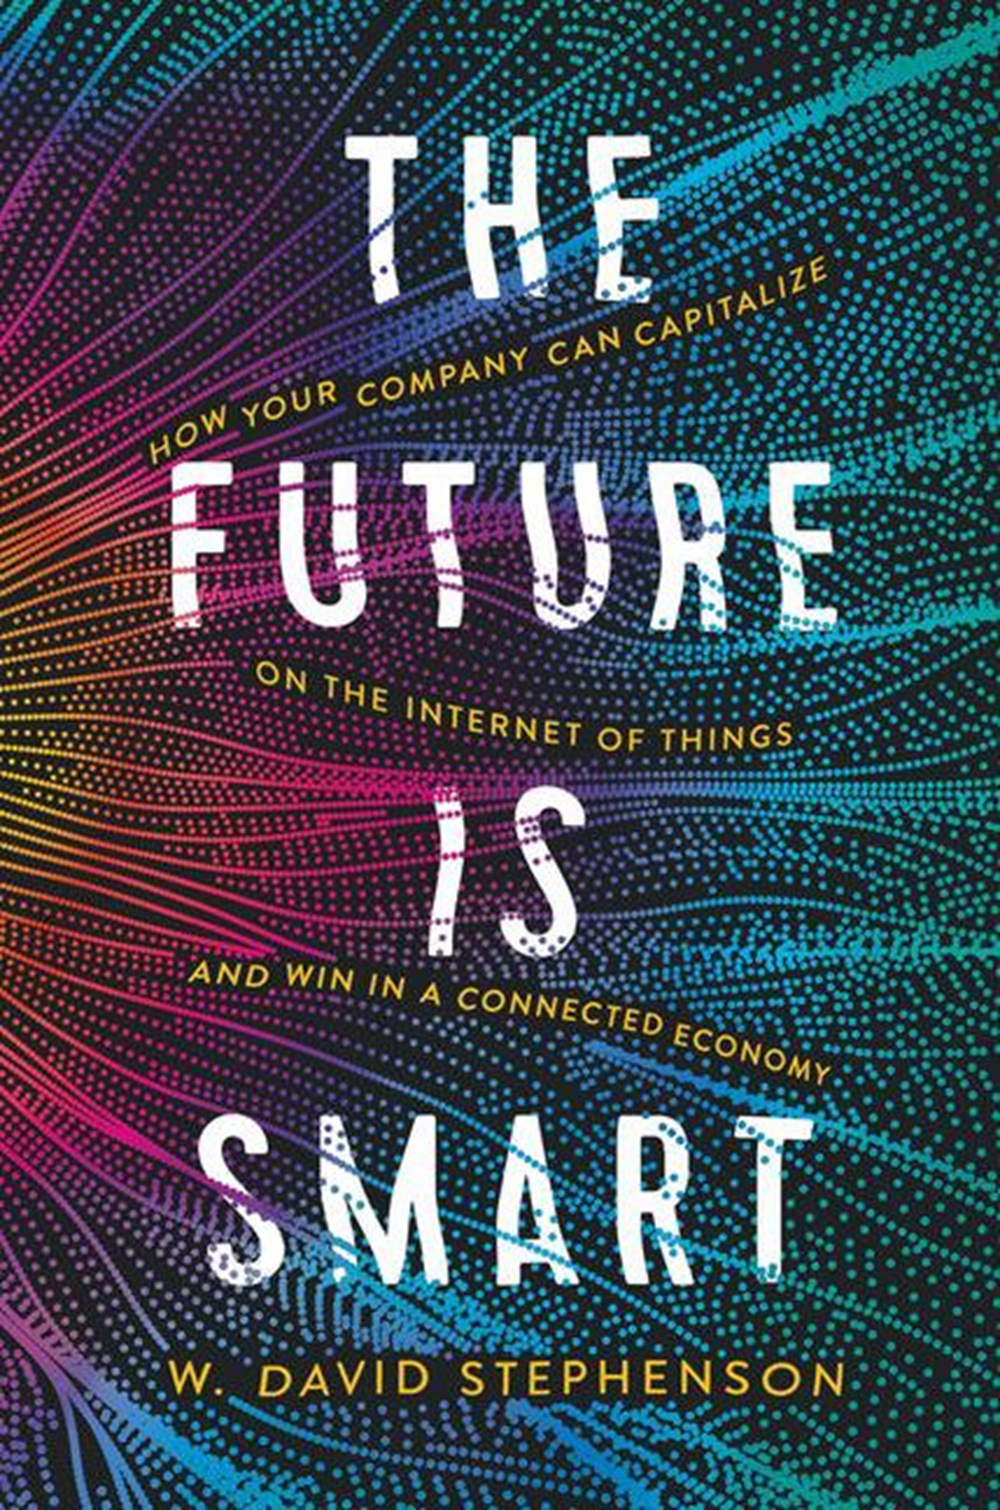 Future Is Smart: How Your Company Can Capitalize on the Internet of Things--And Win in a Connected E